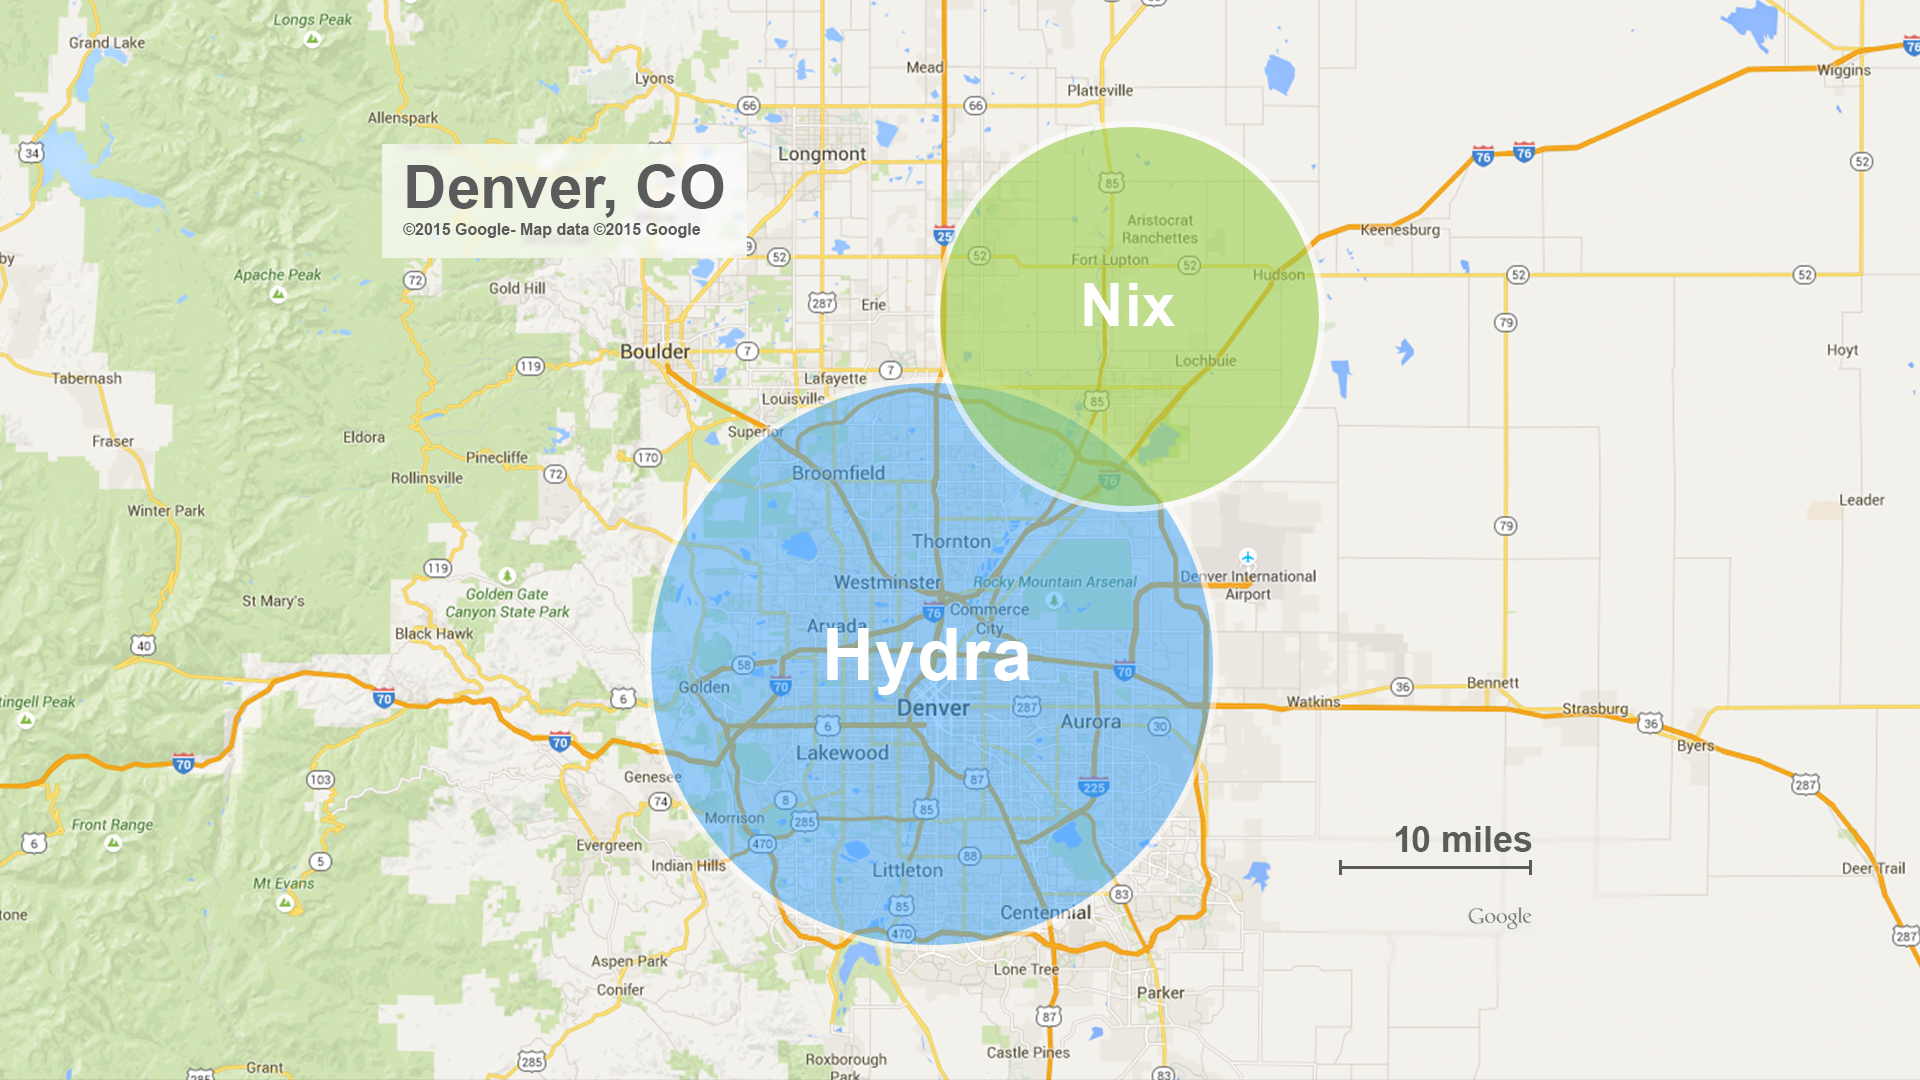 approximate sizes of Pluto’s moons Nix and Hydra compared to Denver, Colorado